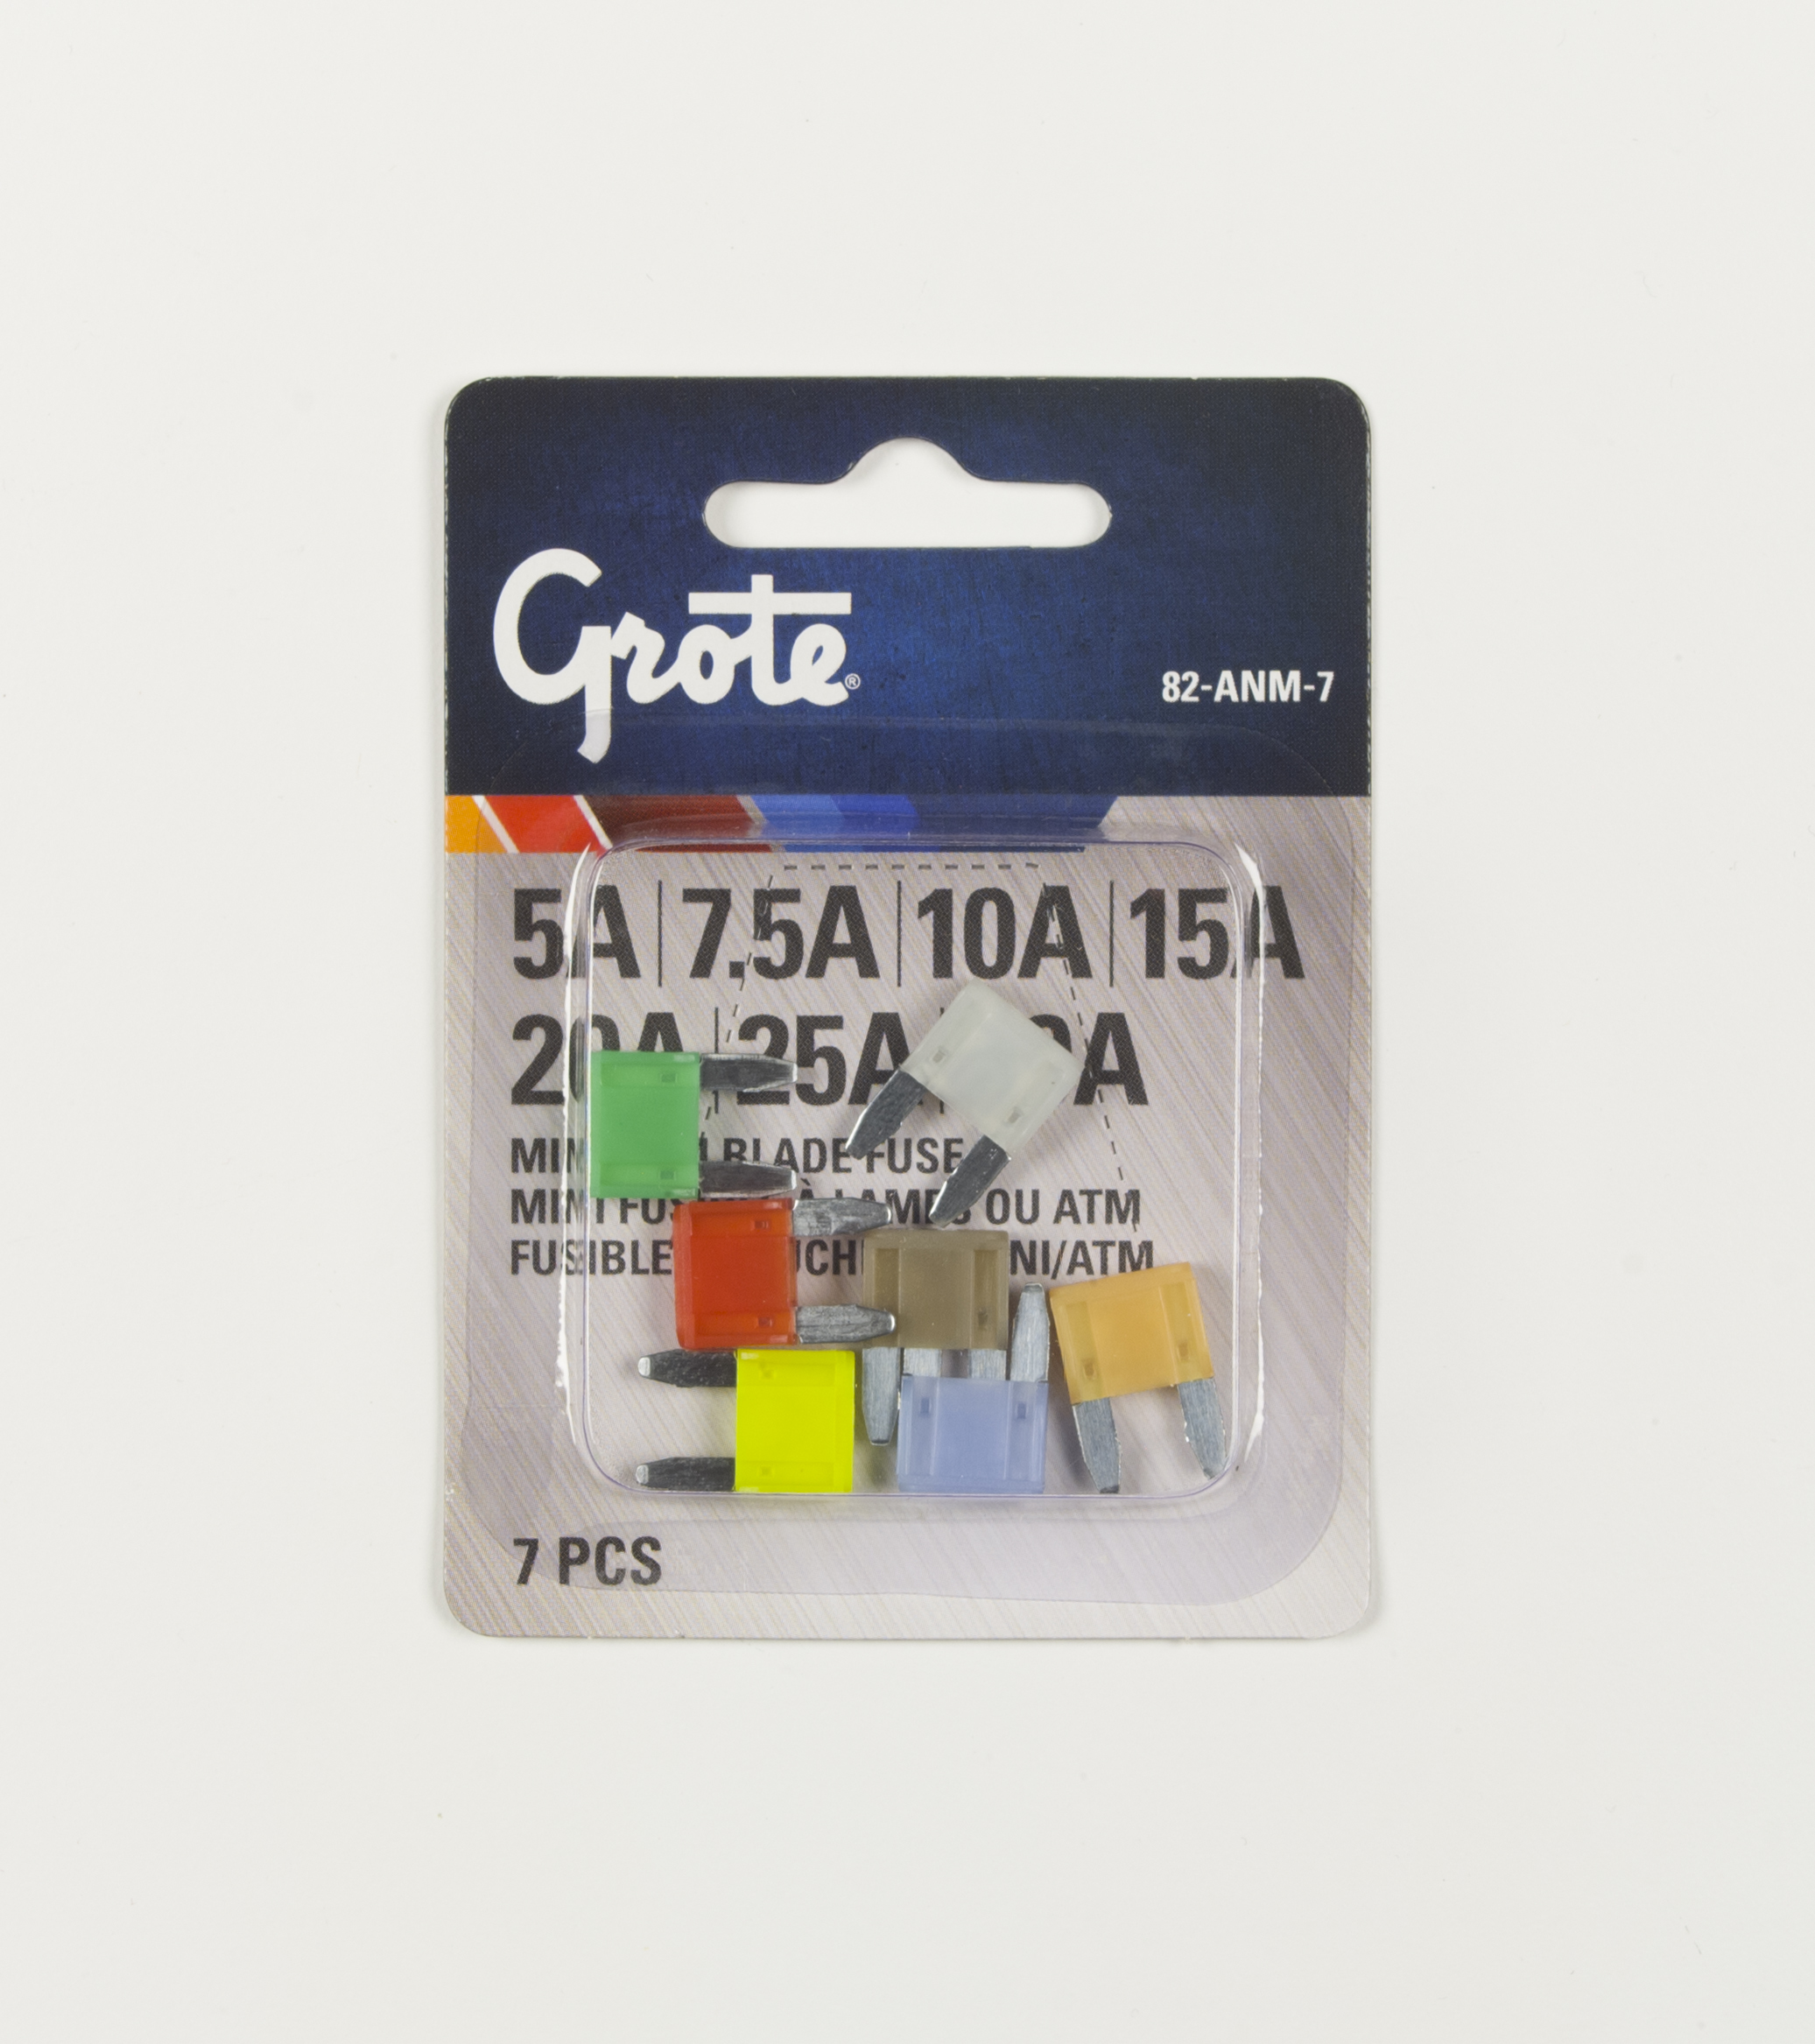 Grote - Atm Fuse Asmt 7/pk - 82-ANM-7